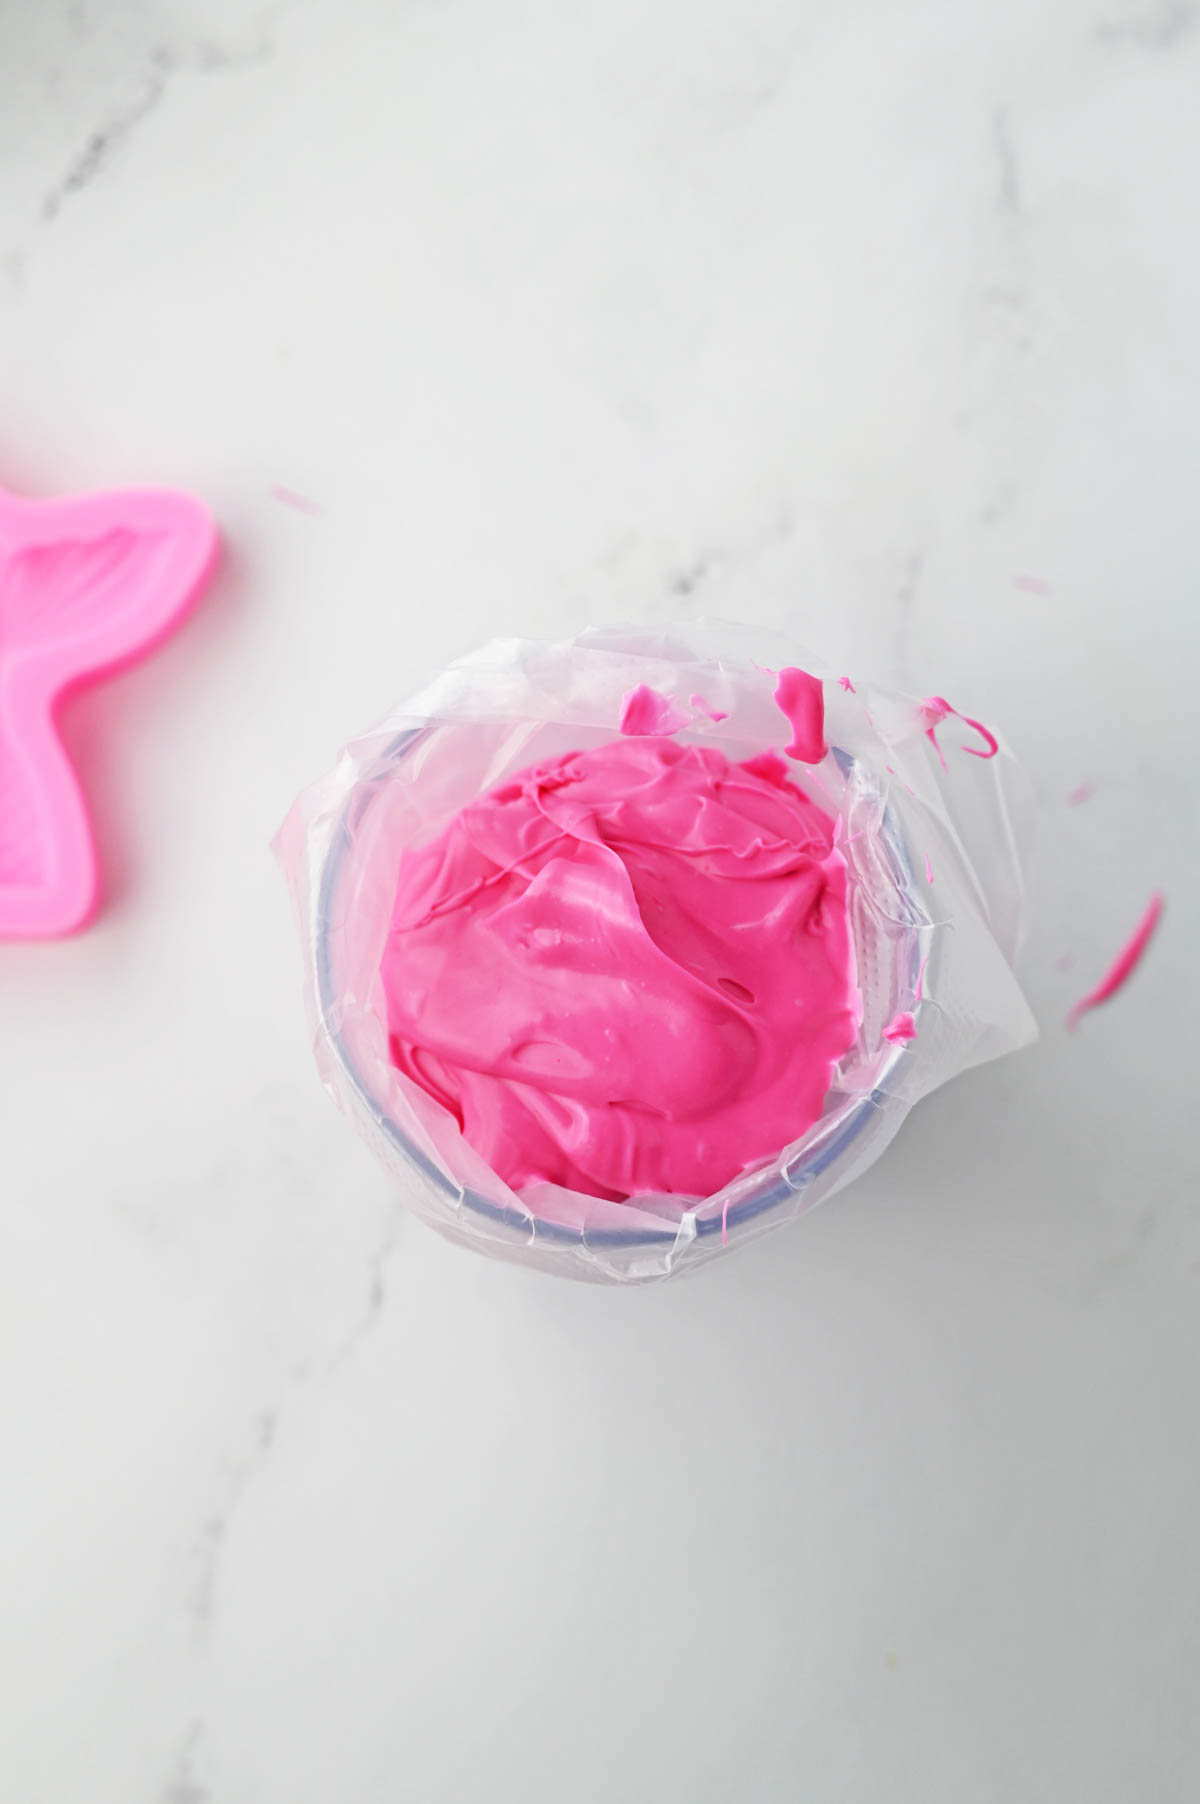 Melted pink candy in piping bag